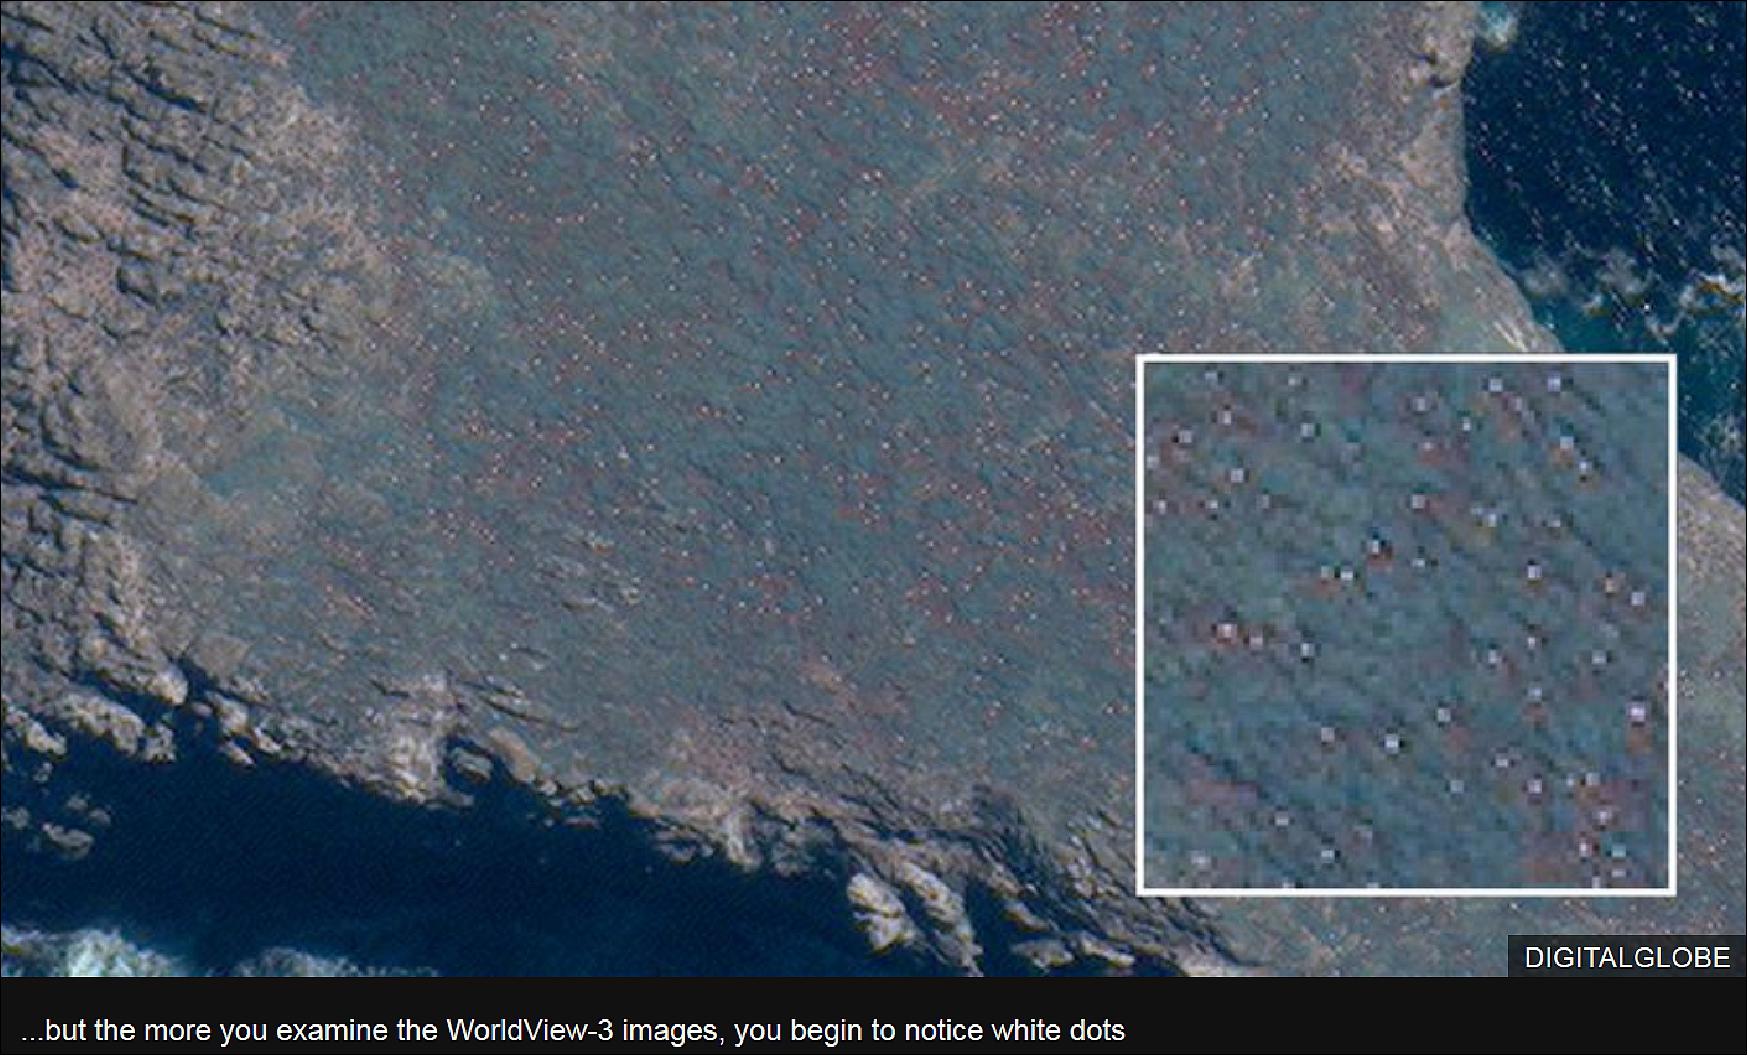 Figure 13: WorldView-3 can see the nesting birds as they sit on eggs to incubate them or as they guard newly hatched chicks (image credit: BBC, DigitalGlobe)